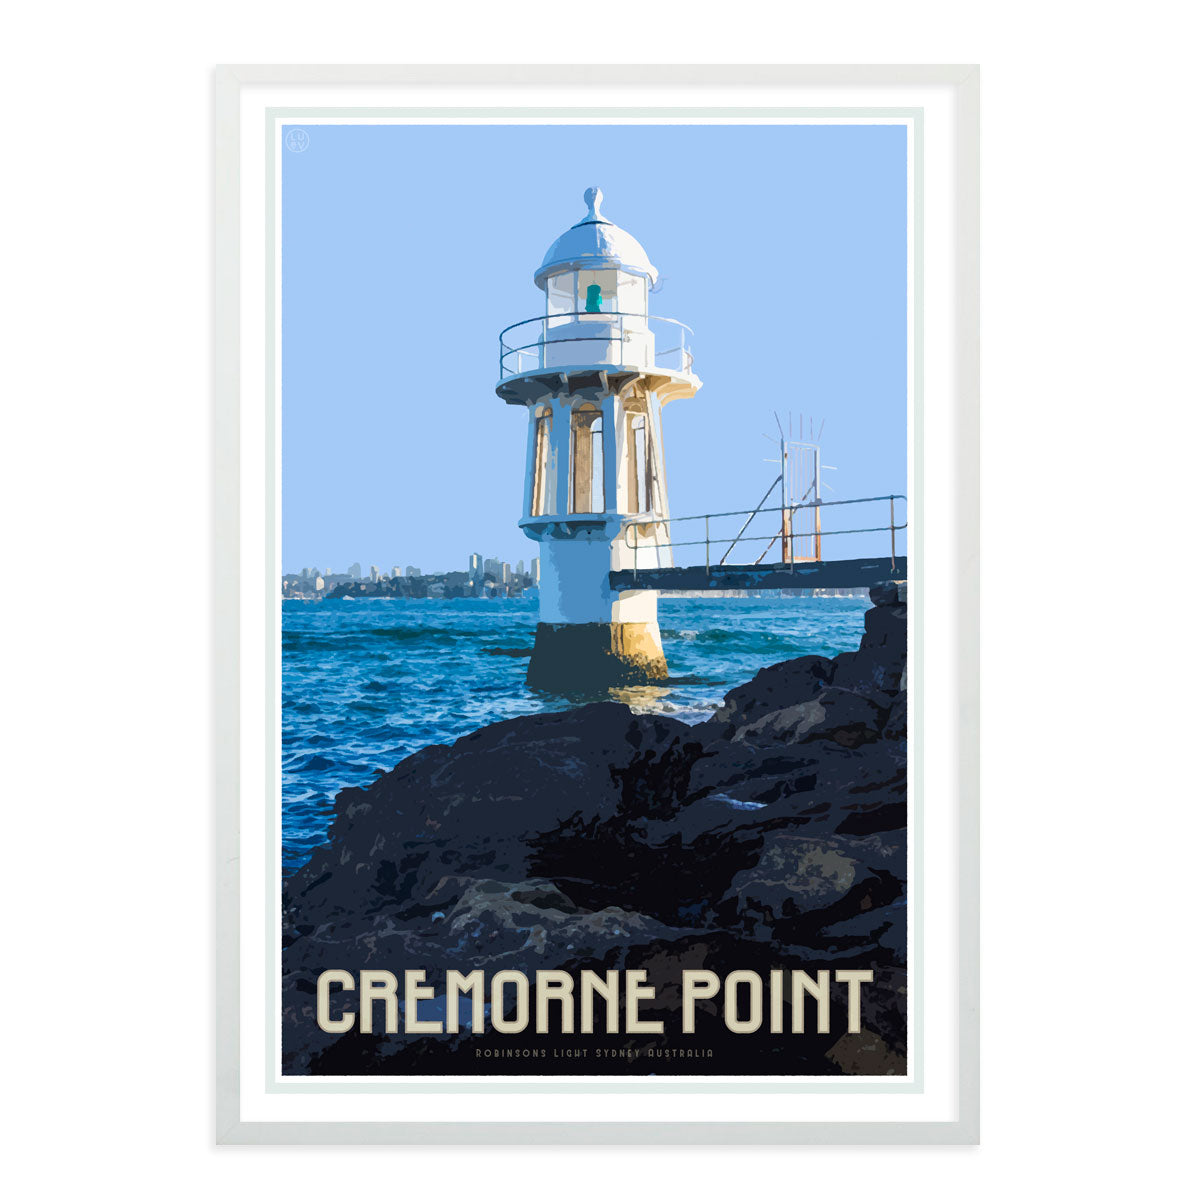 Cremorne point vintage style travel black framed print by Places We Luv